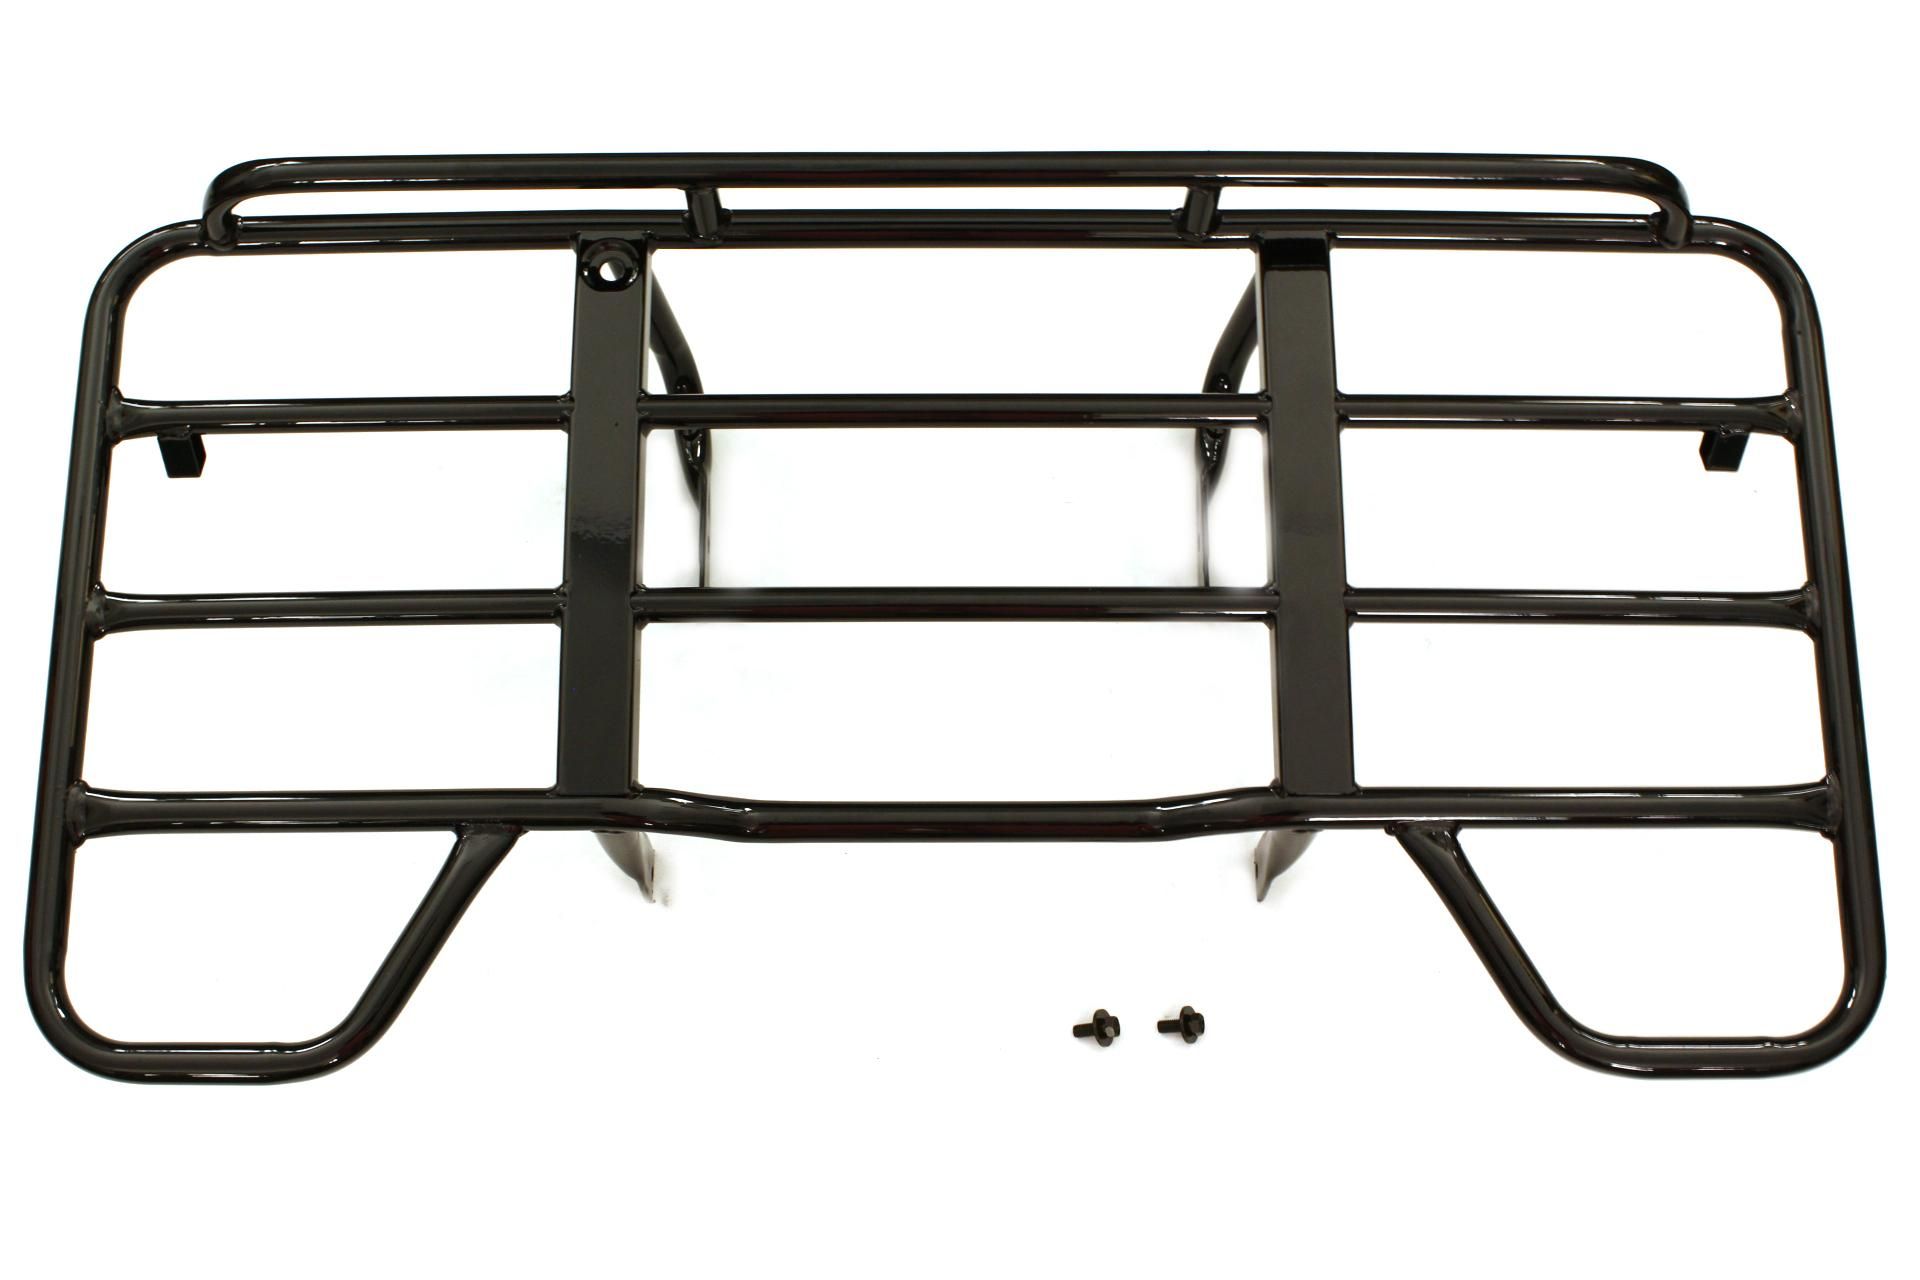 81300-HM7-305 LUGGAGE CARRIER